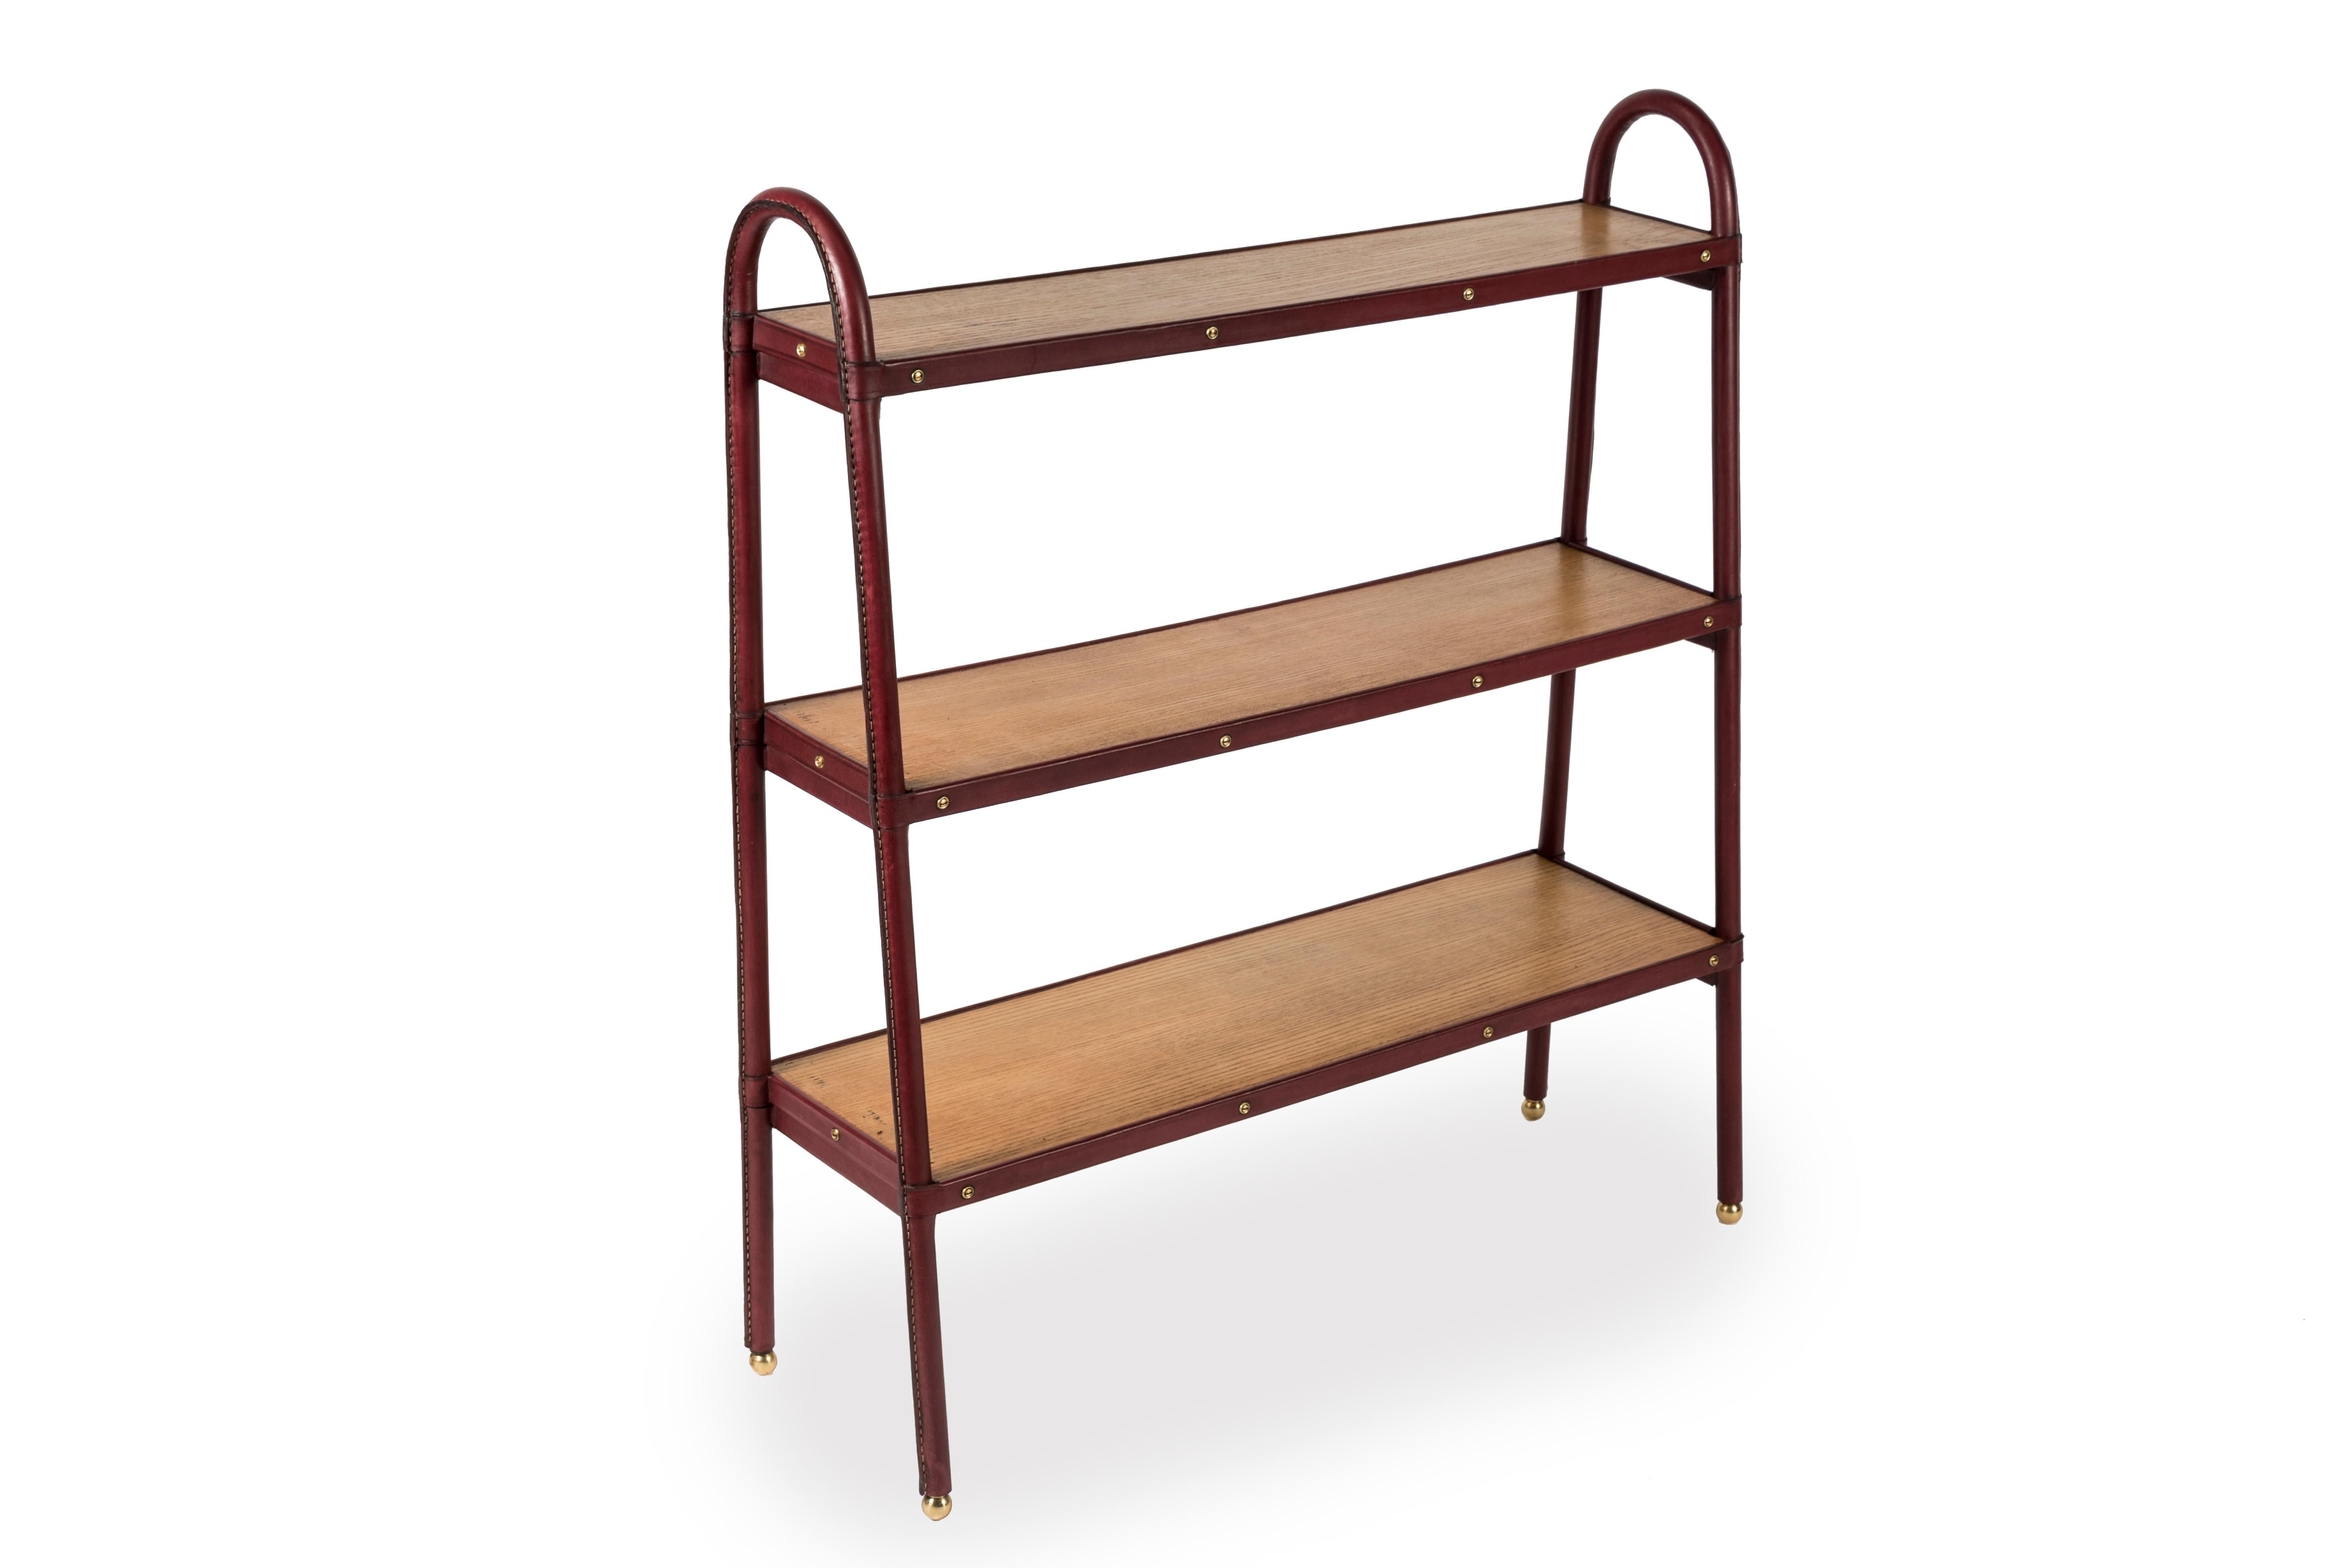 European Stitched leather Bookrack by Jacques Adnet